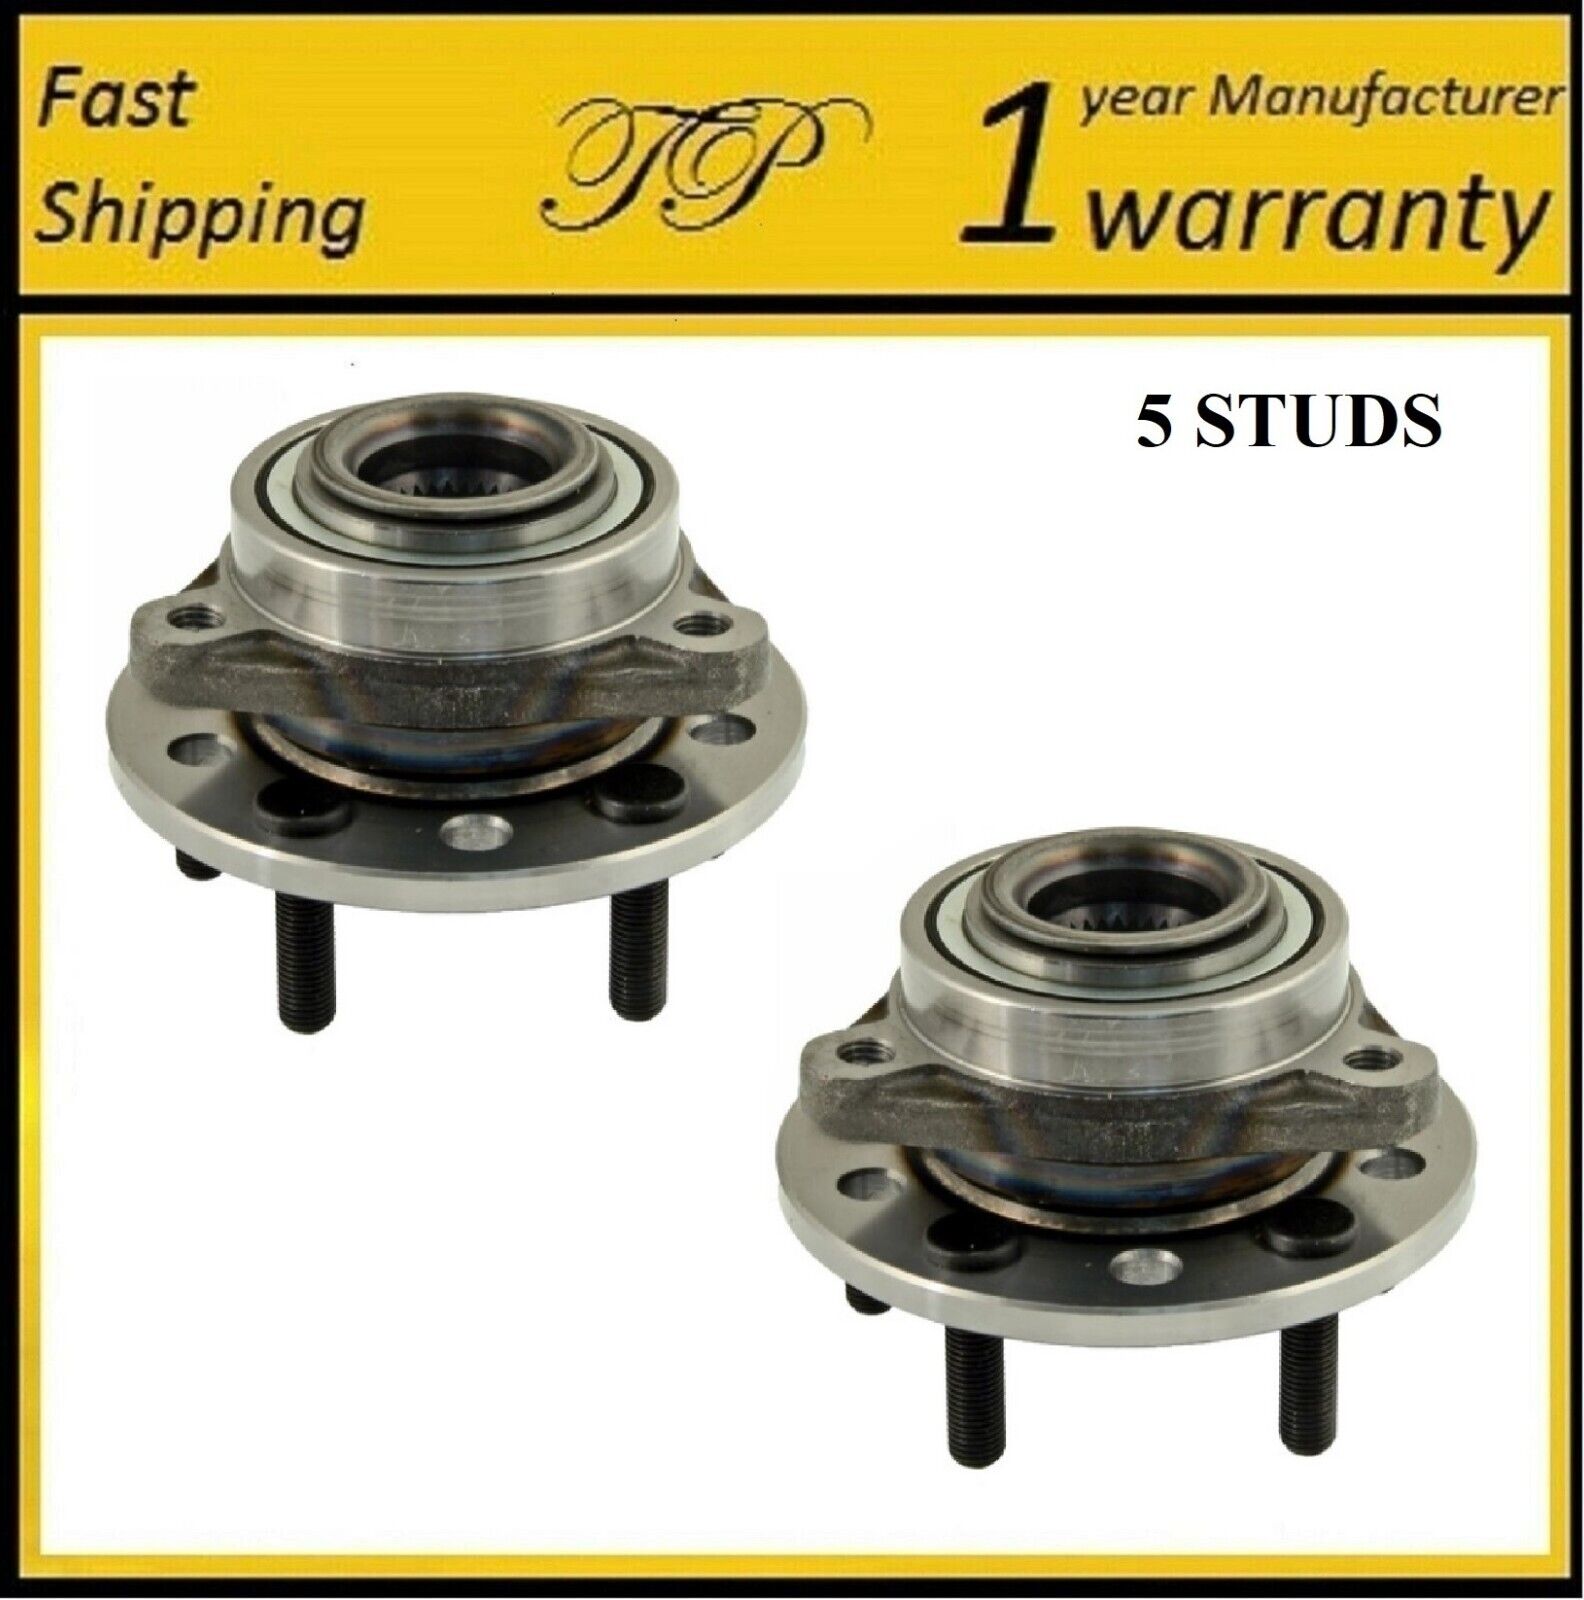 FRONT Wheel Hub Bearing Assembly For 93-04 CHRYSLER 300M,CONCORDE, INTREPID PAIR